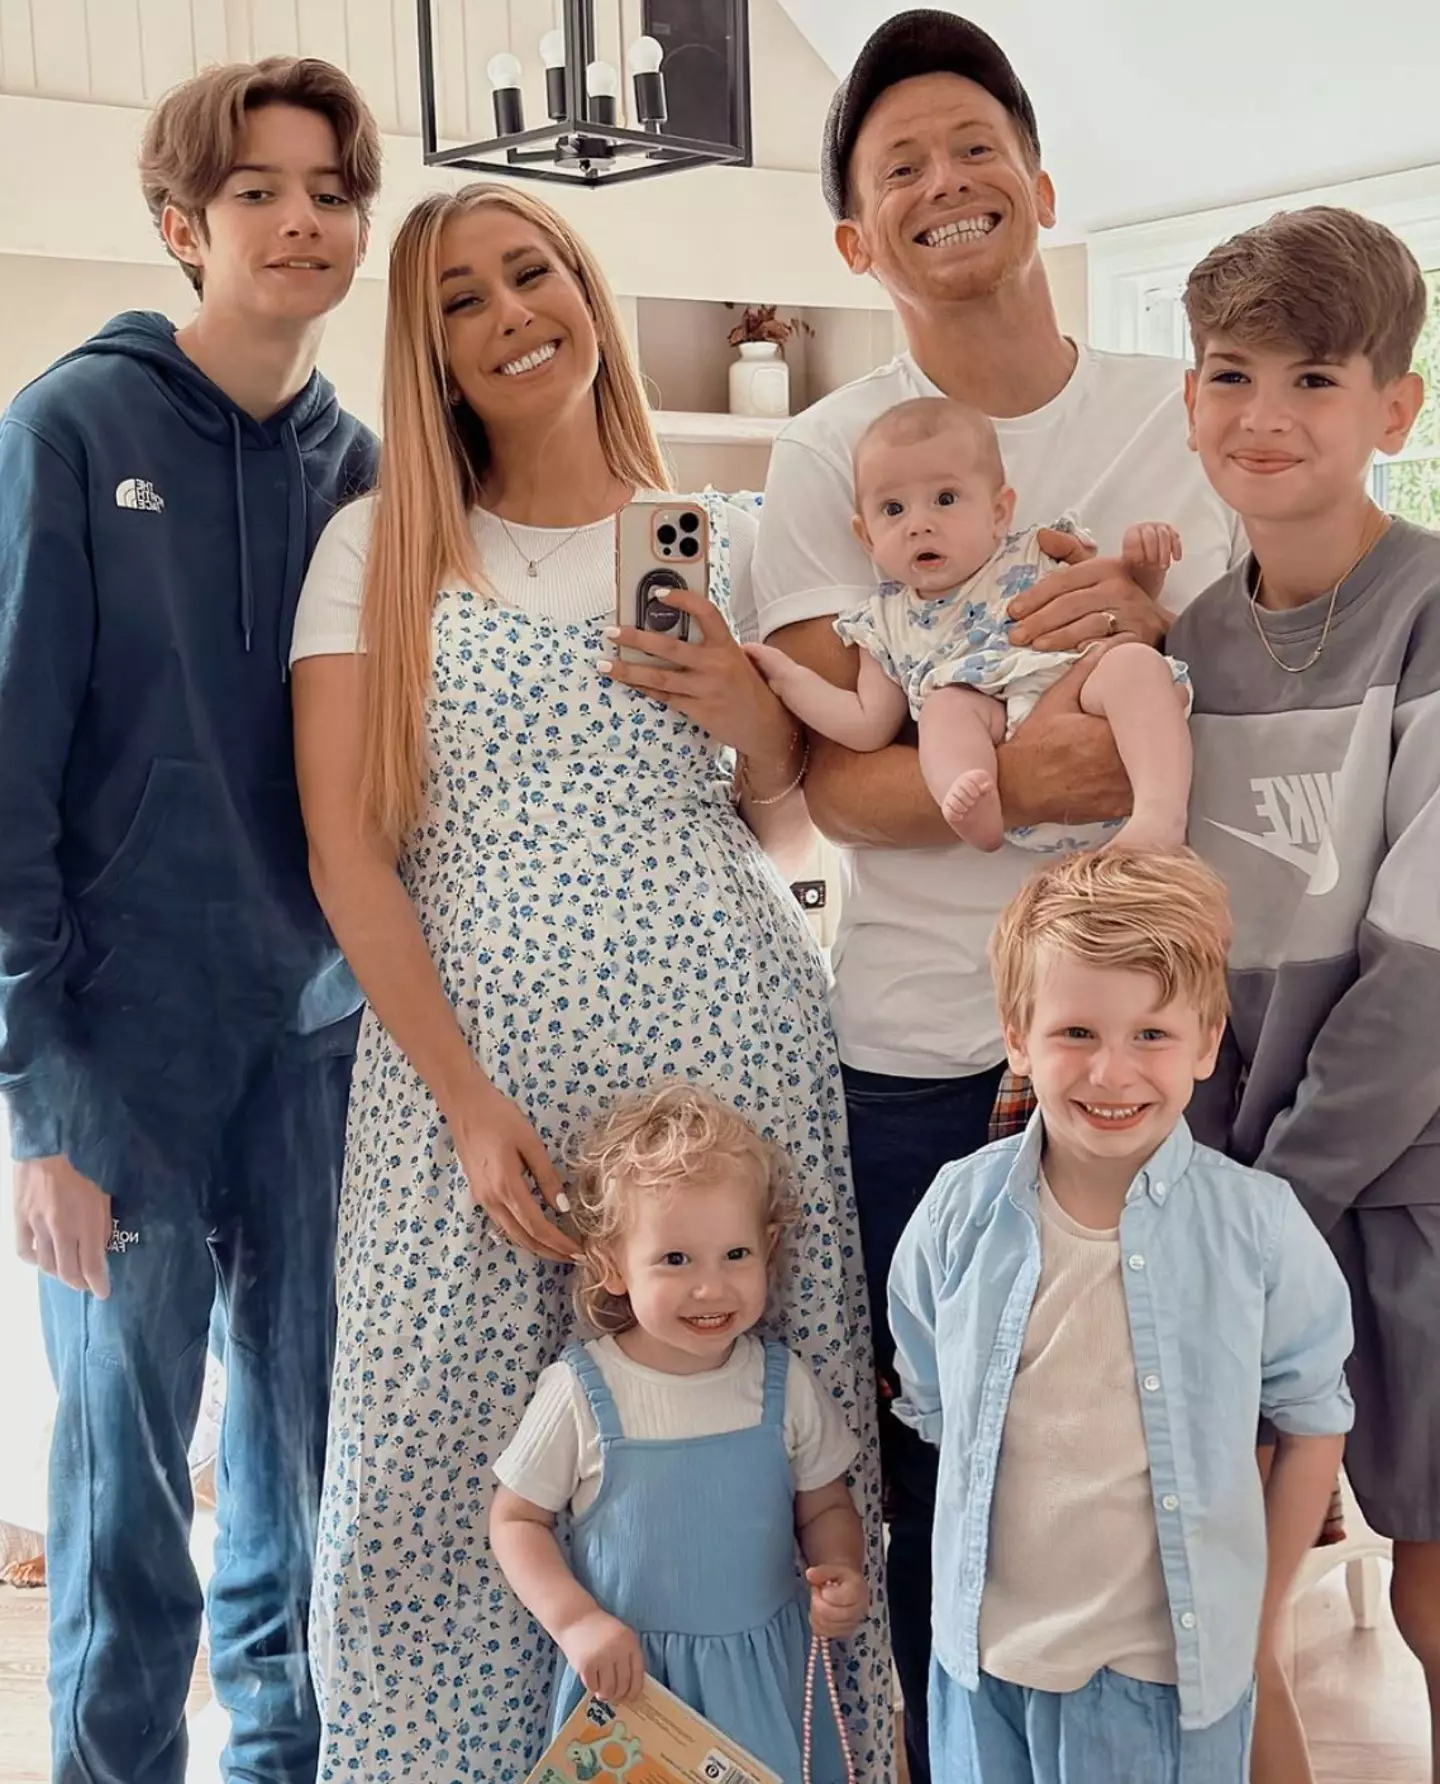 Stacey Solomon recently posted the snap with her 'whole world'.